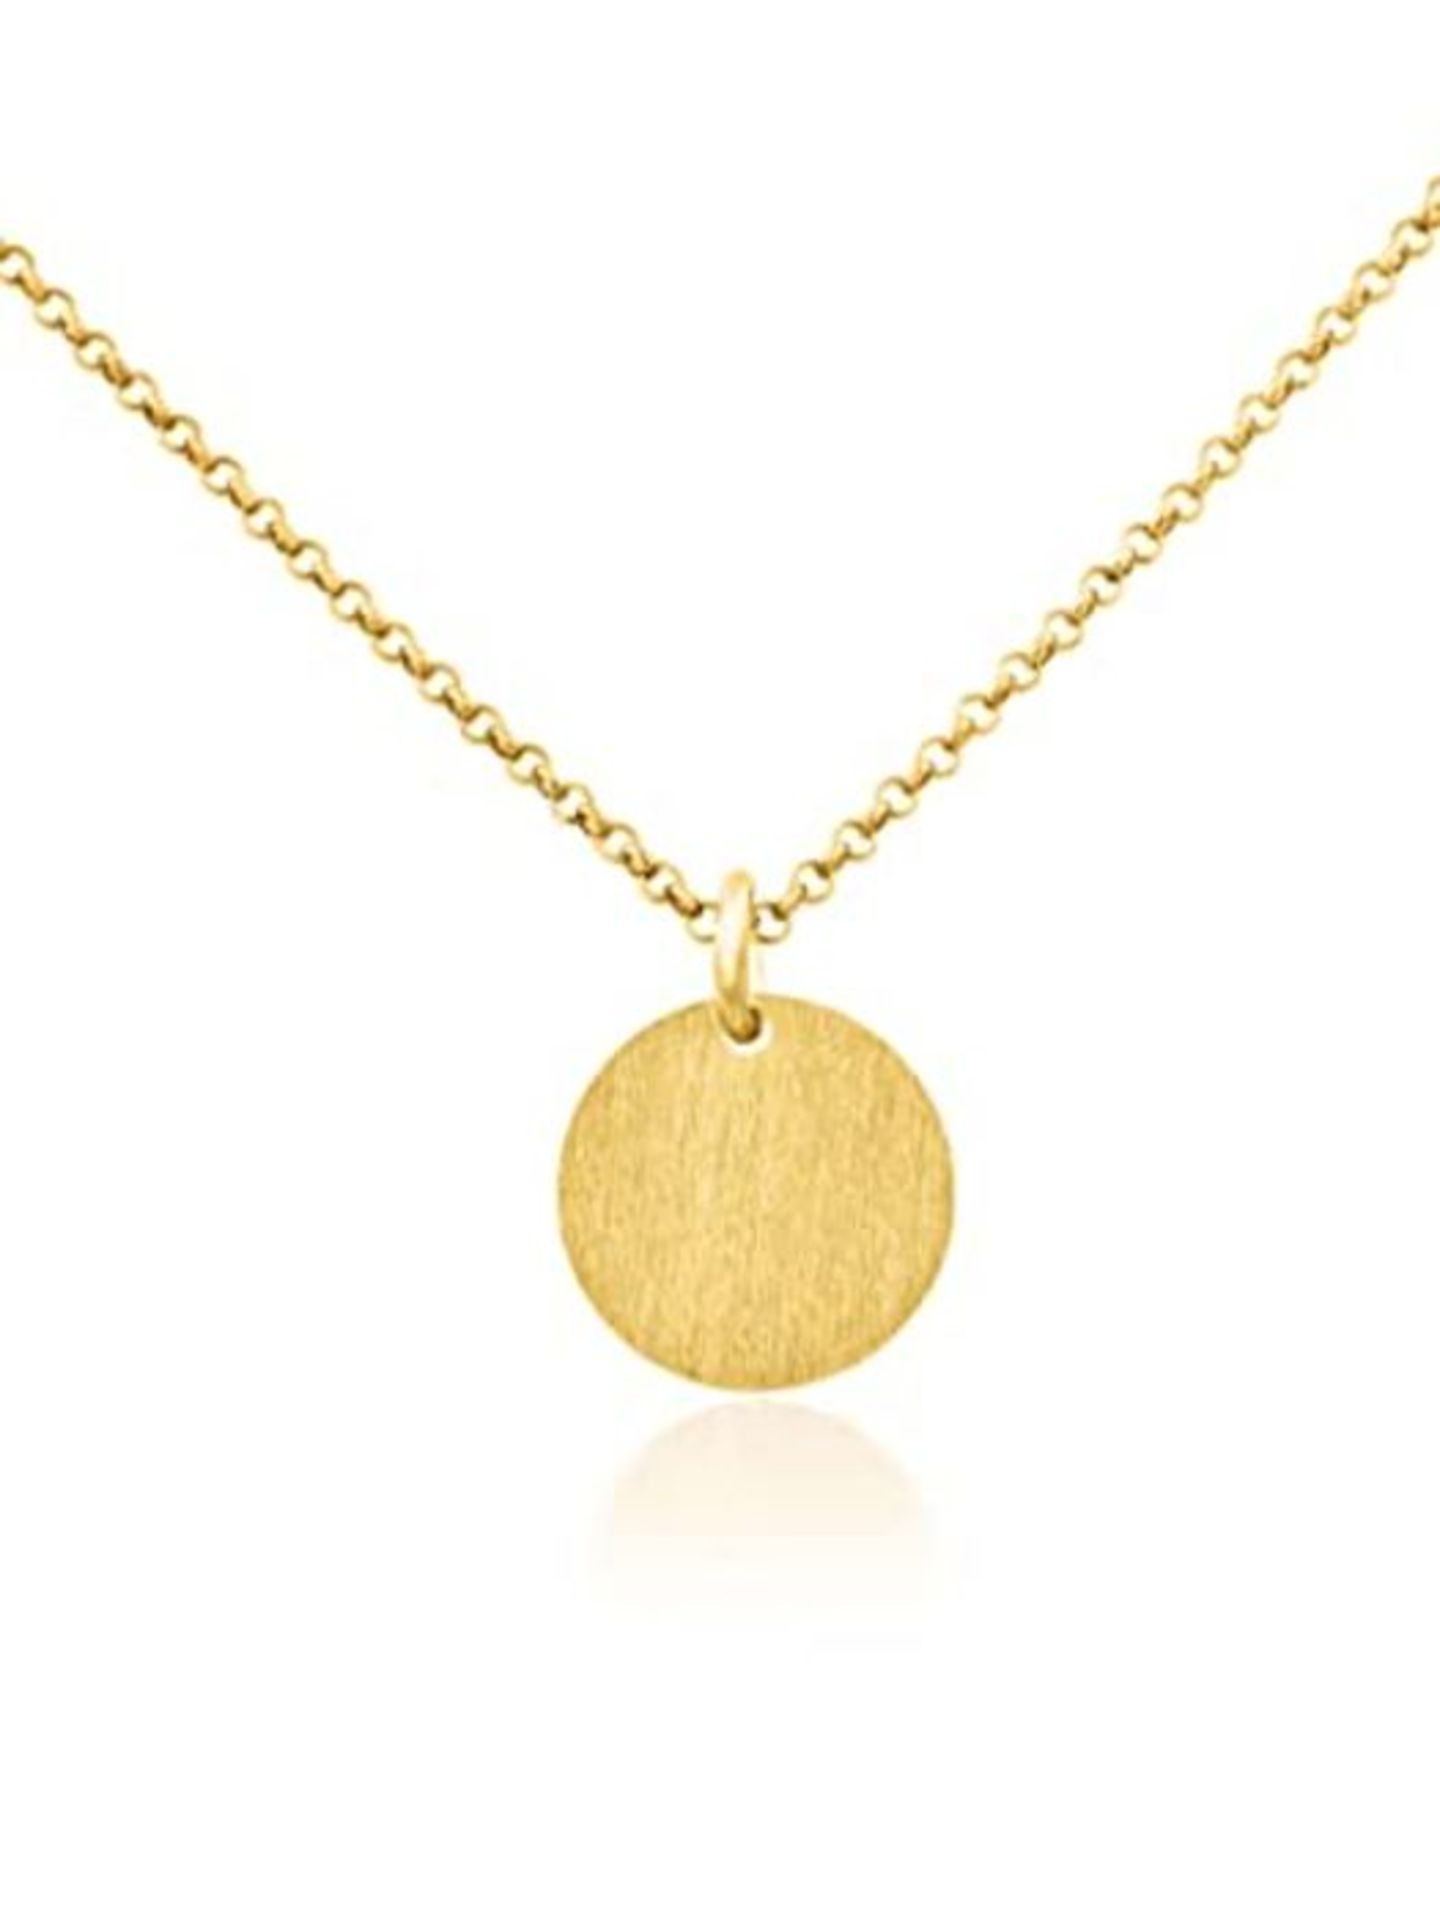 modabilé necklace women with pendant Circle Round Gold 925 Sterling Silver (45cm I 1,